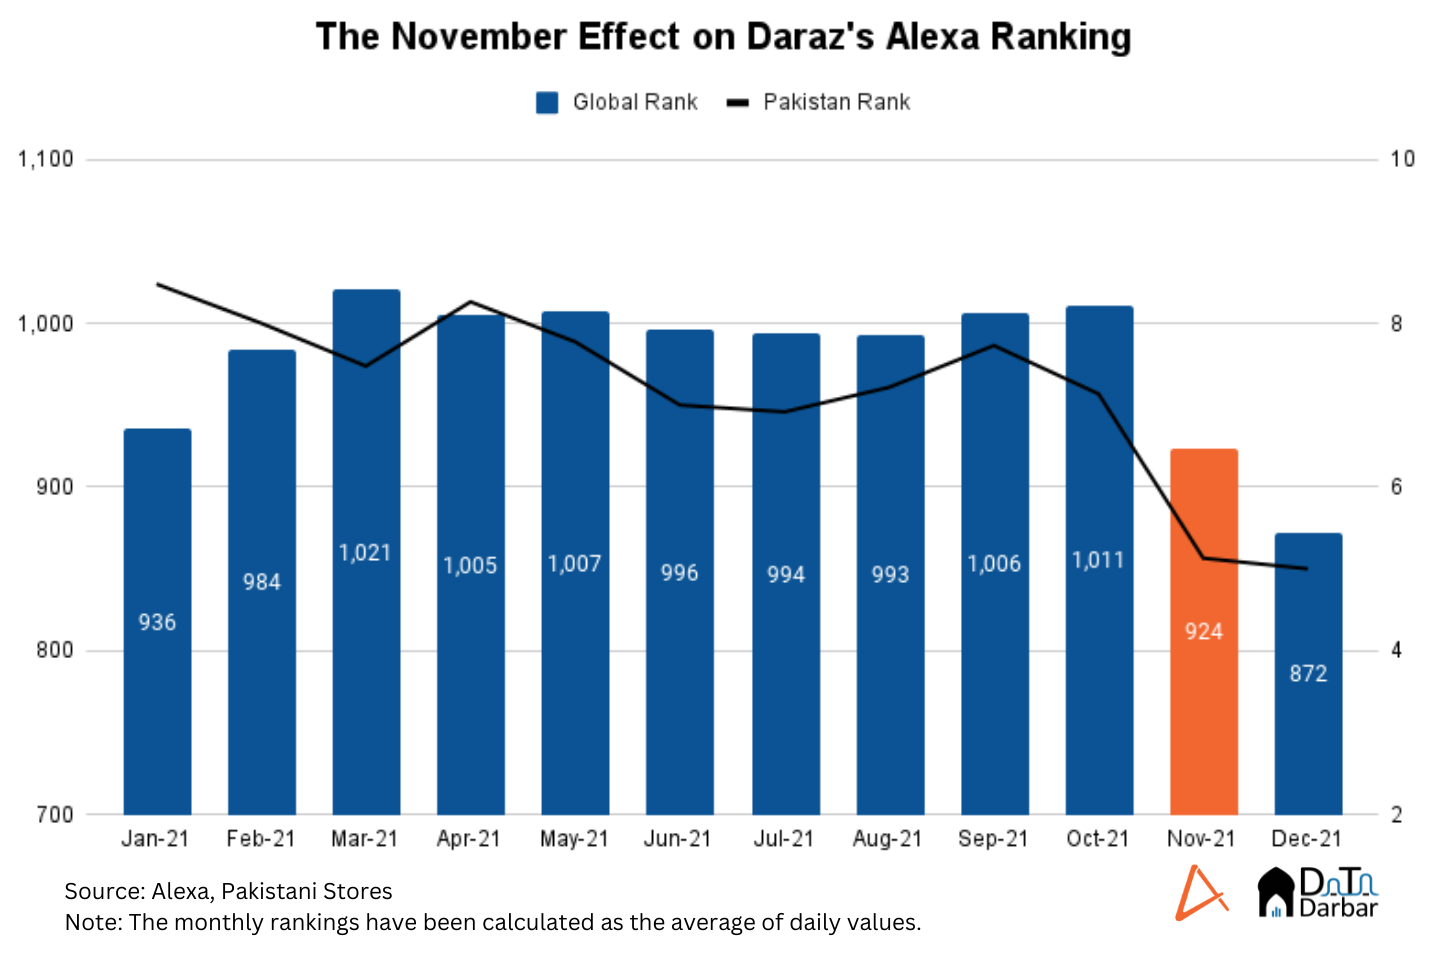 This chart shows the visble improvement in Daraz's Alexa ranking in November. 